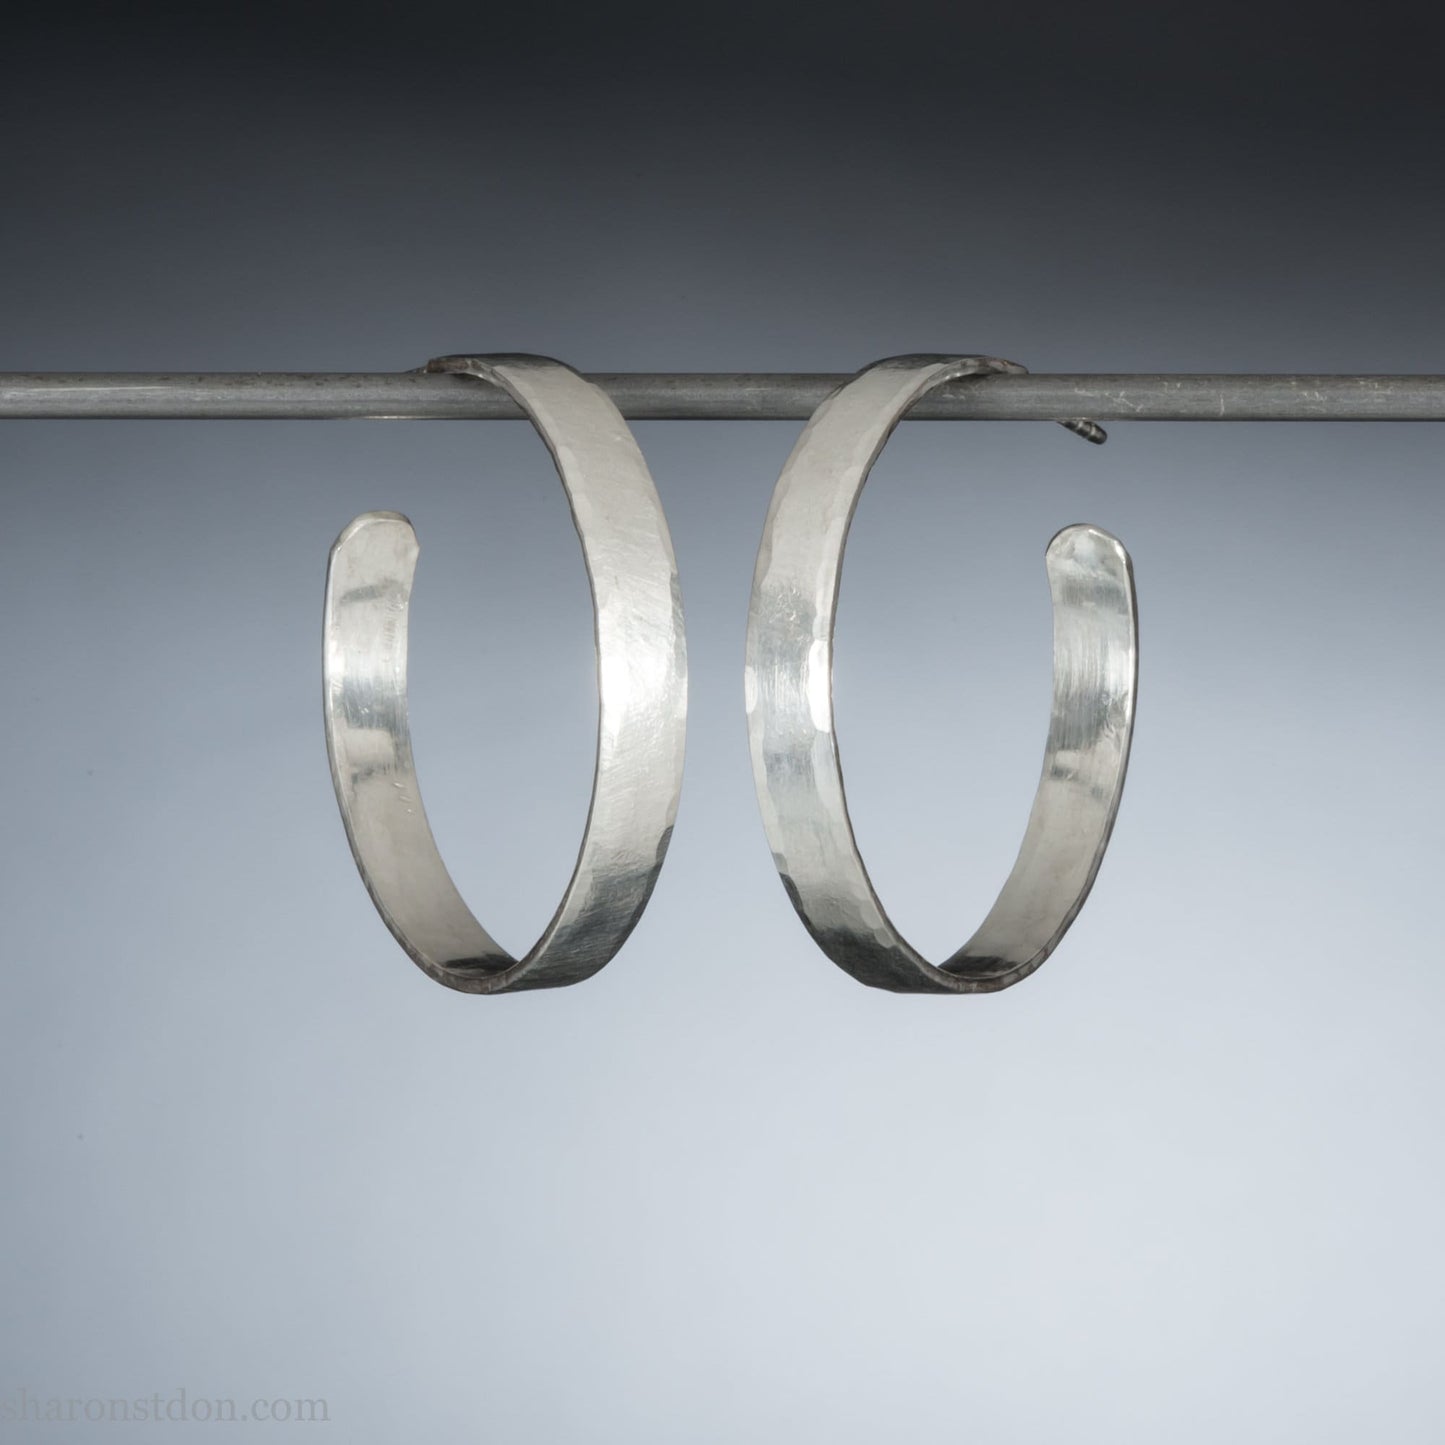 Handmade 925 sterling silver hoop earrings for women. Comfortable, lightweight, daily wear earrings with a hammered texture.